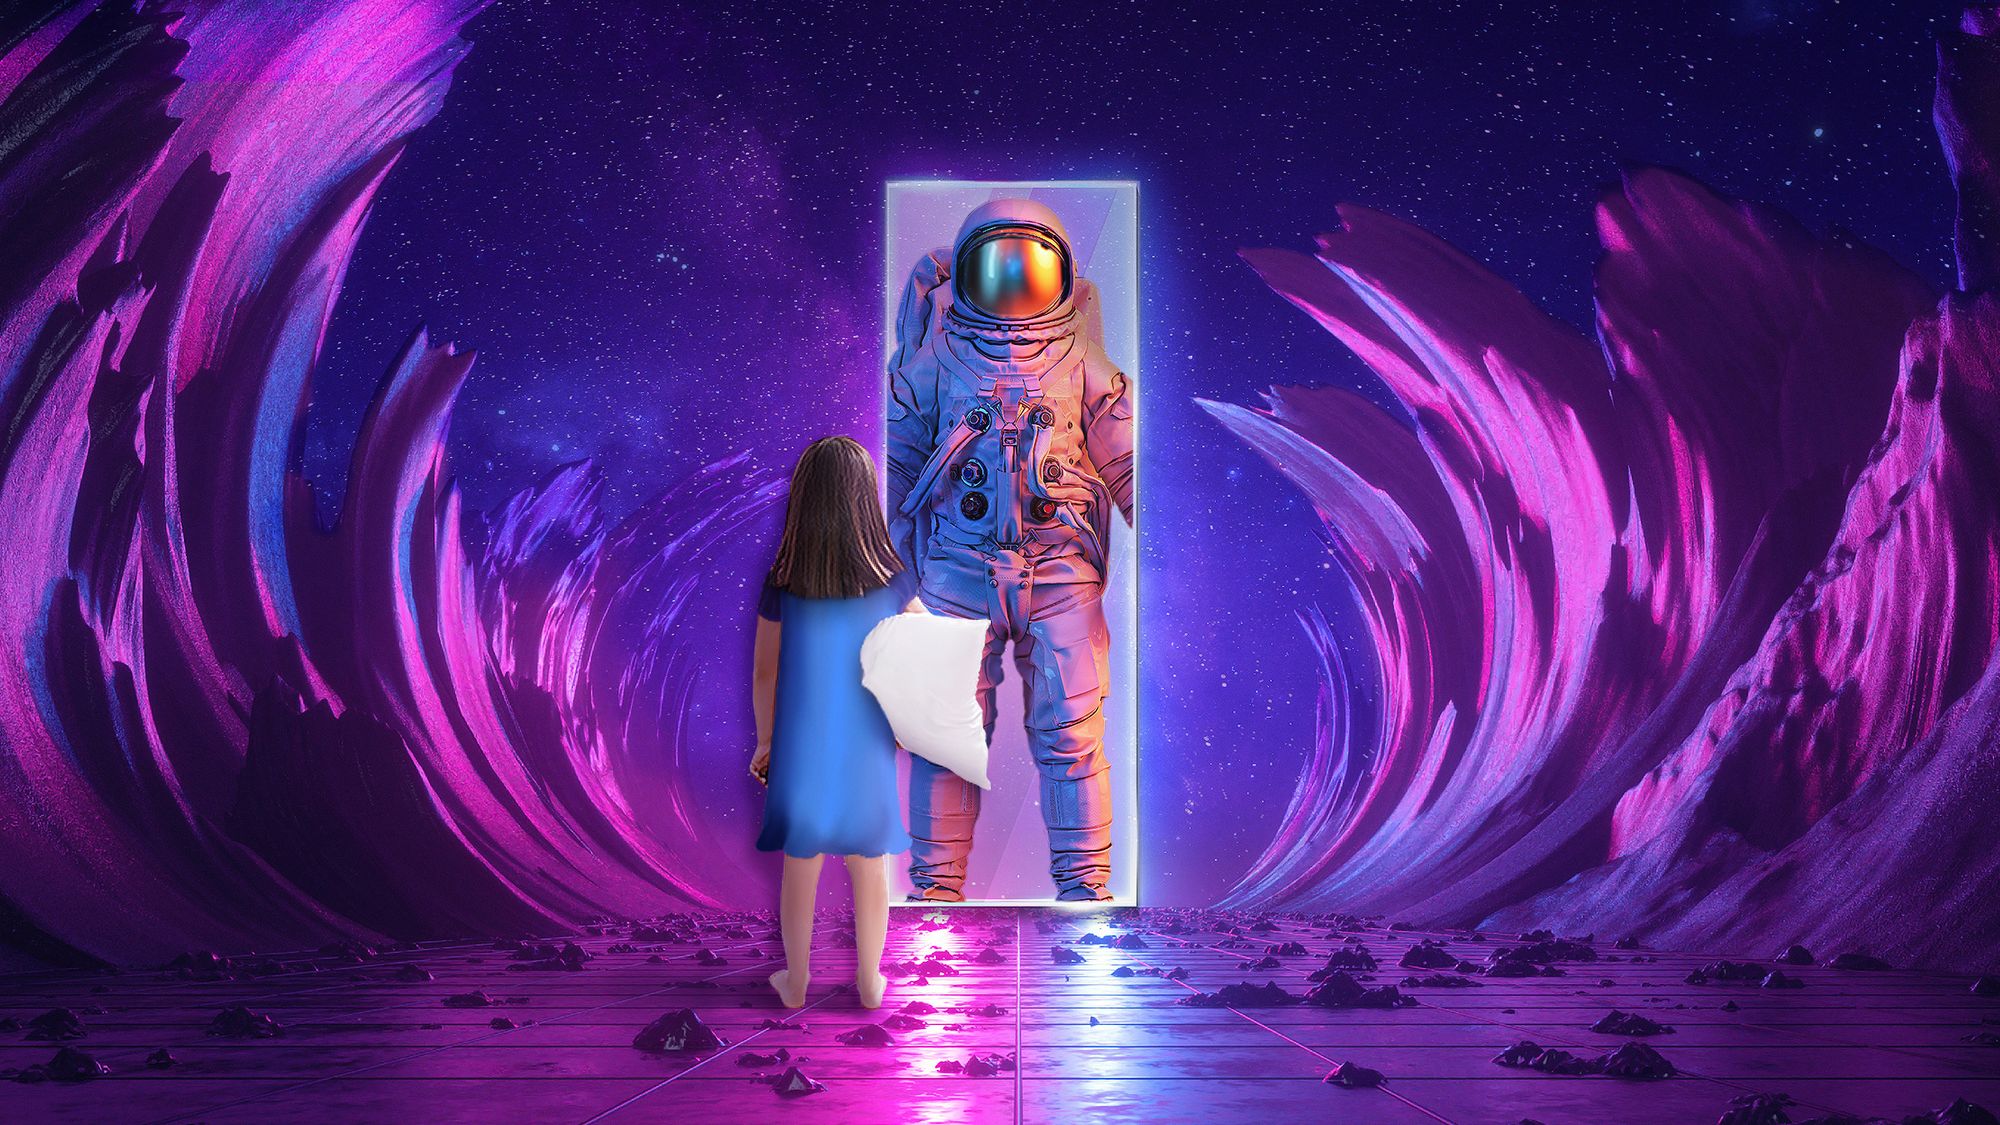  A young girl dreams of being an astronaut in her adult life in an alien world.